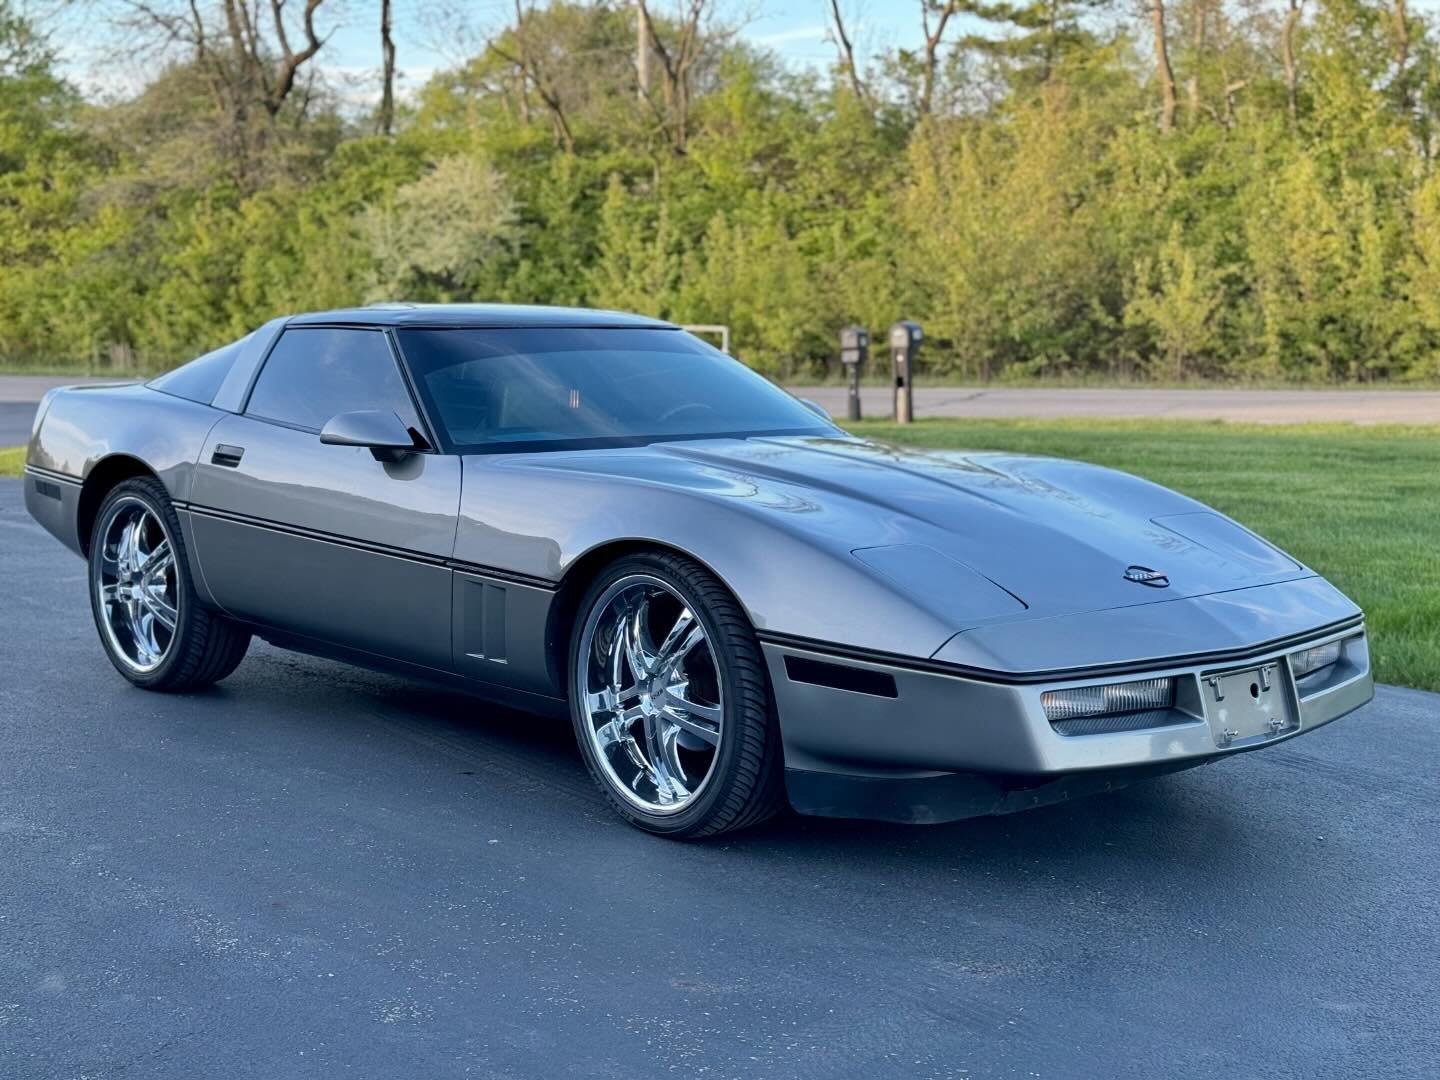 Badass 1986 Chevrolet Corvette came by for Window tint, tail light and marker tint. Should be back soon for a full vinyl wrap!